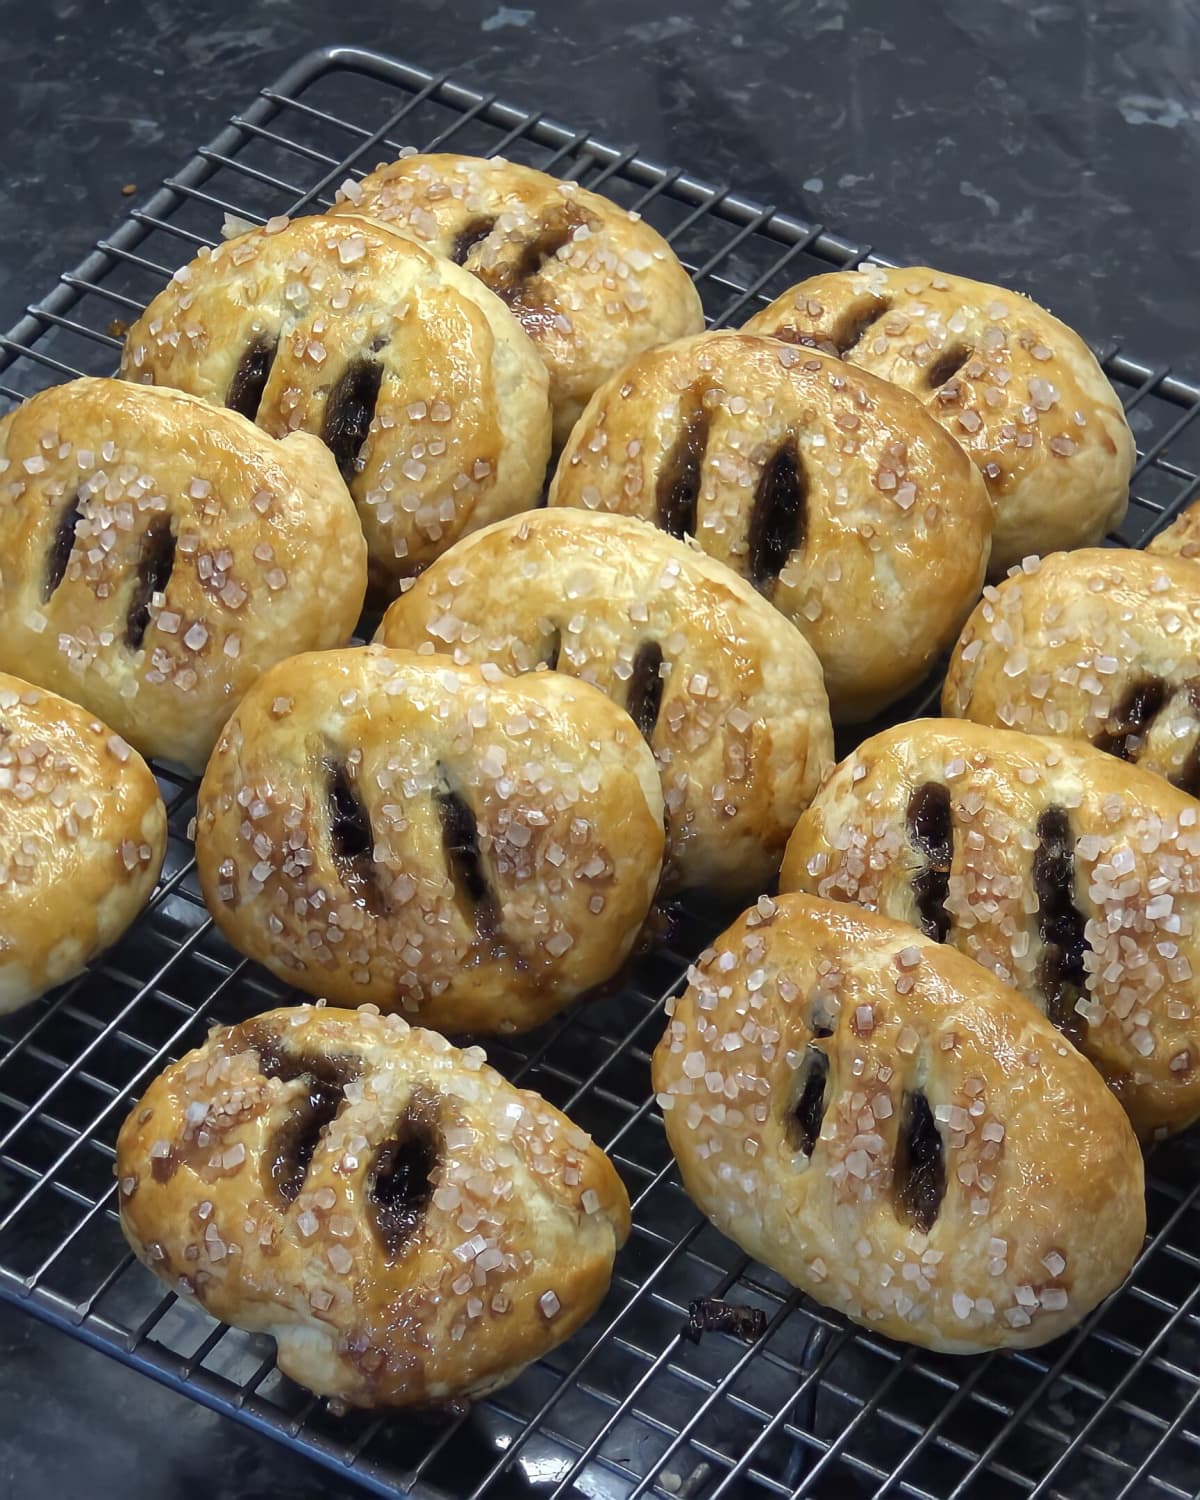 Eccles cakes on oven rack